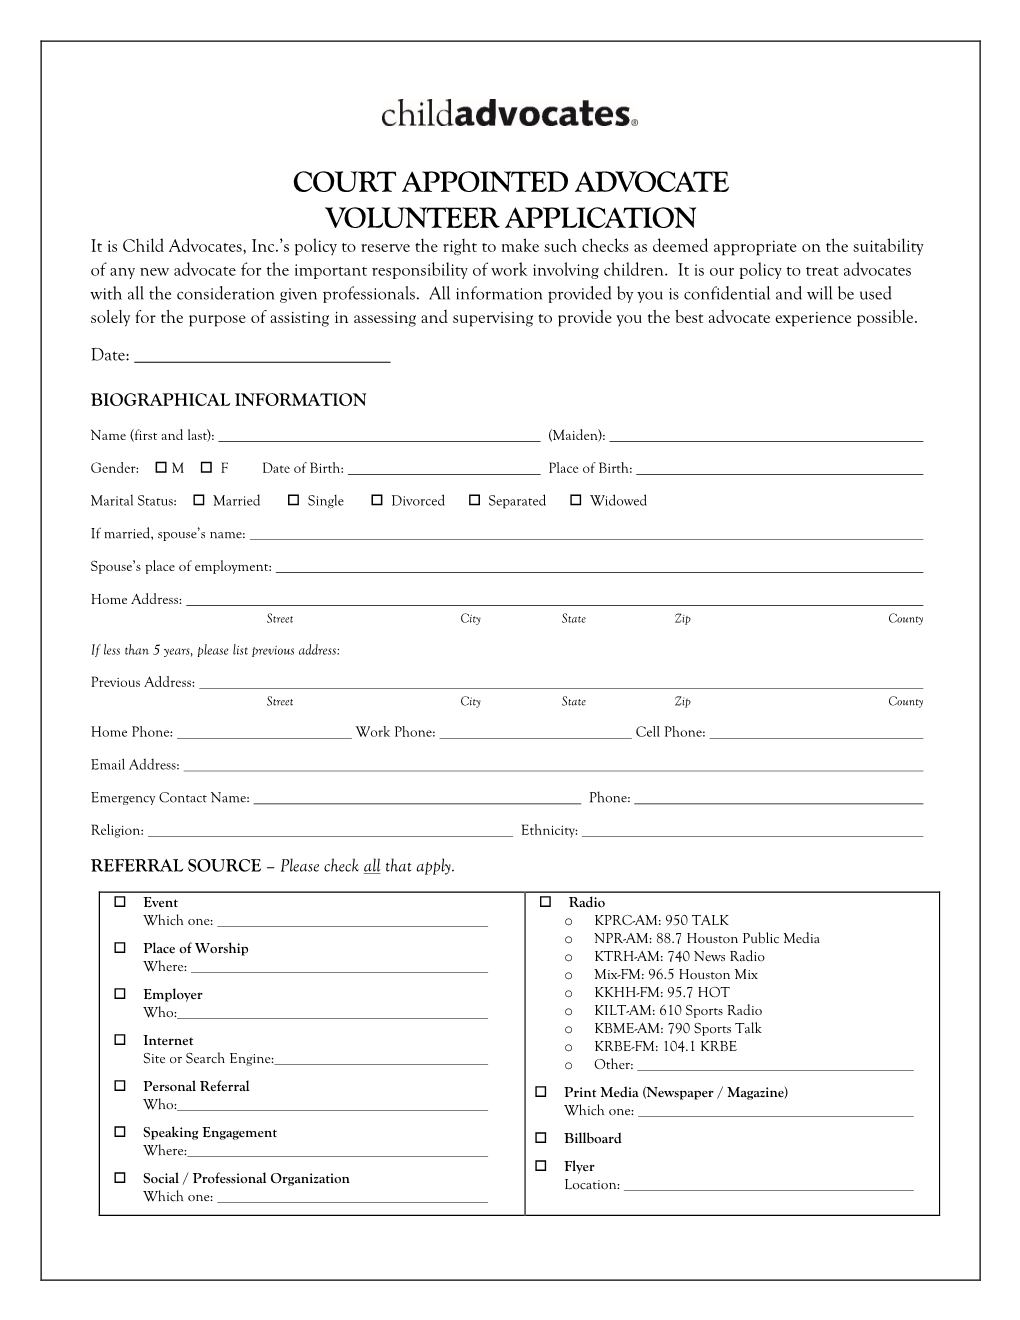 Court Appointed Advocate Volunteer Application